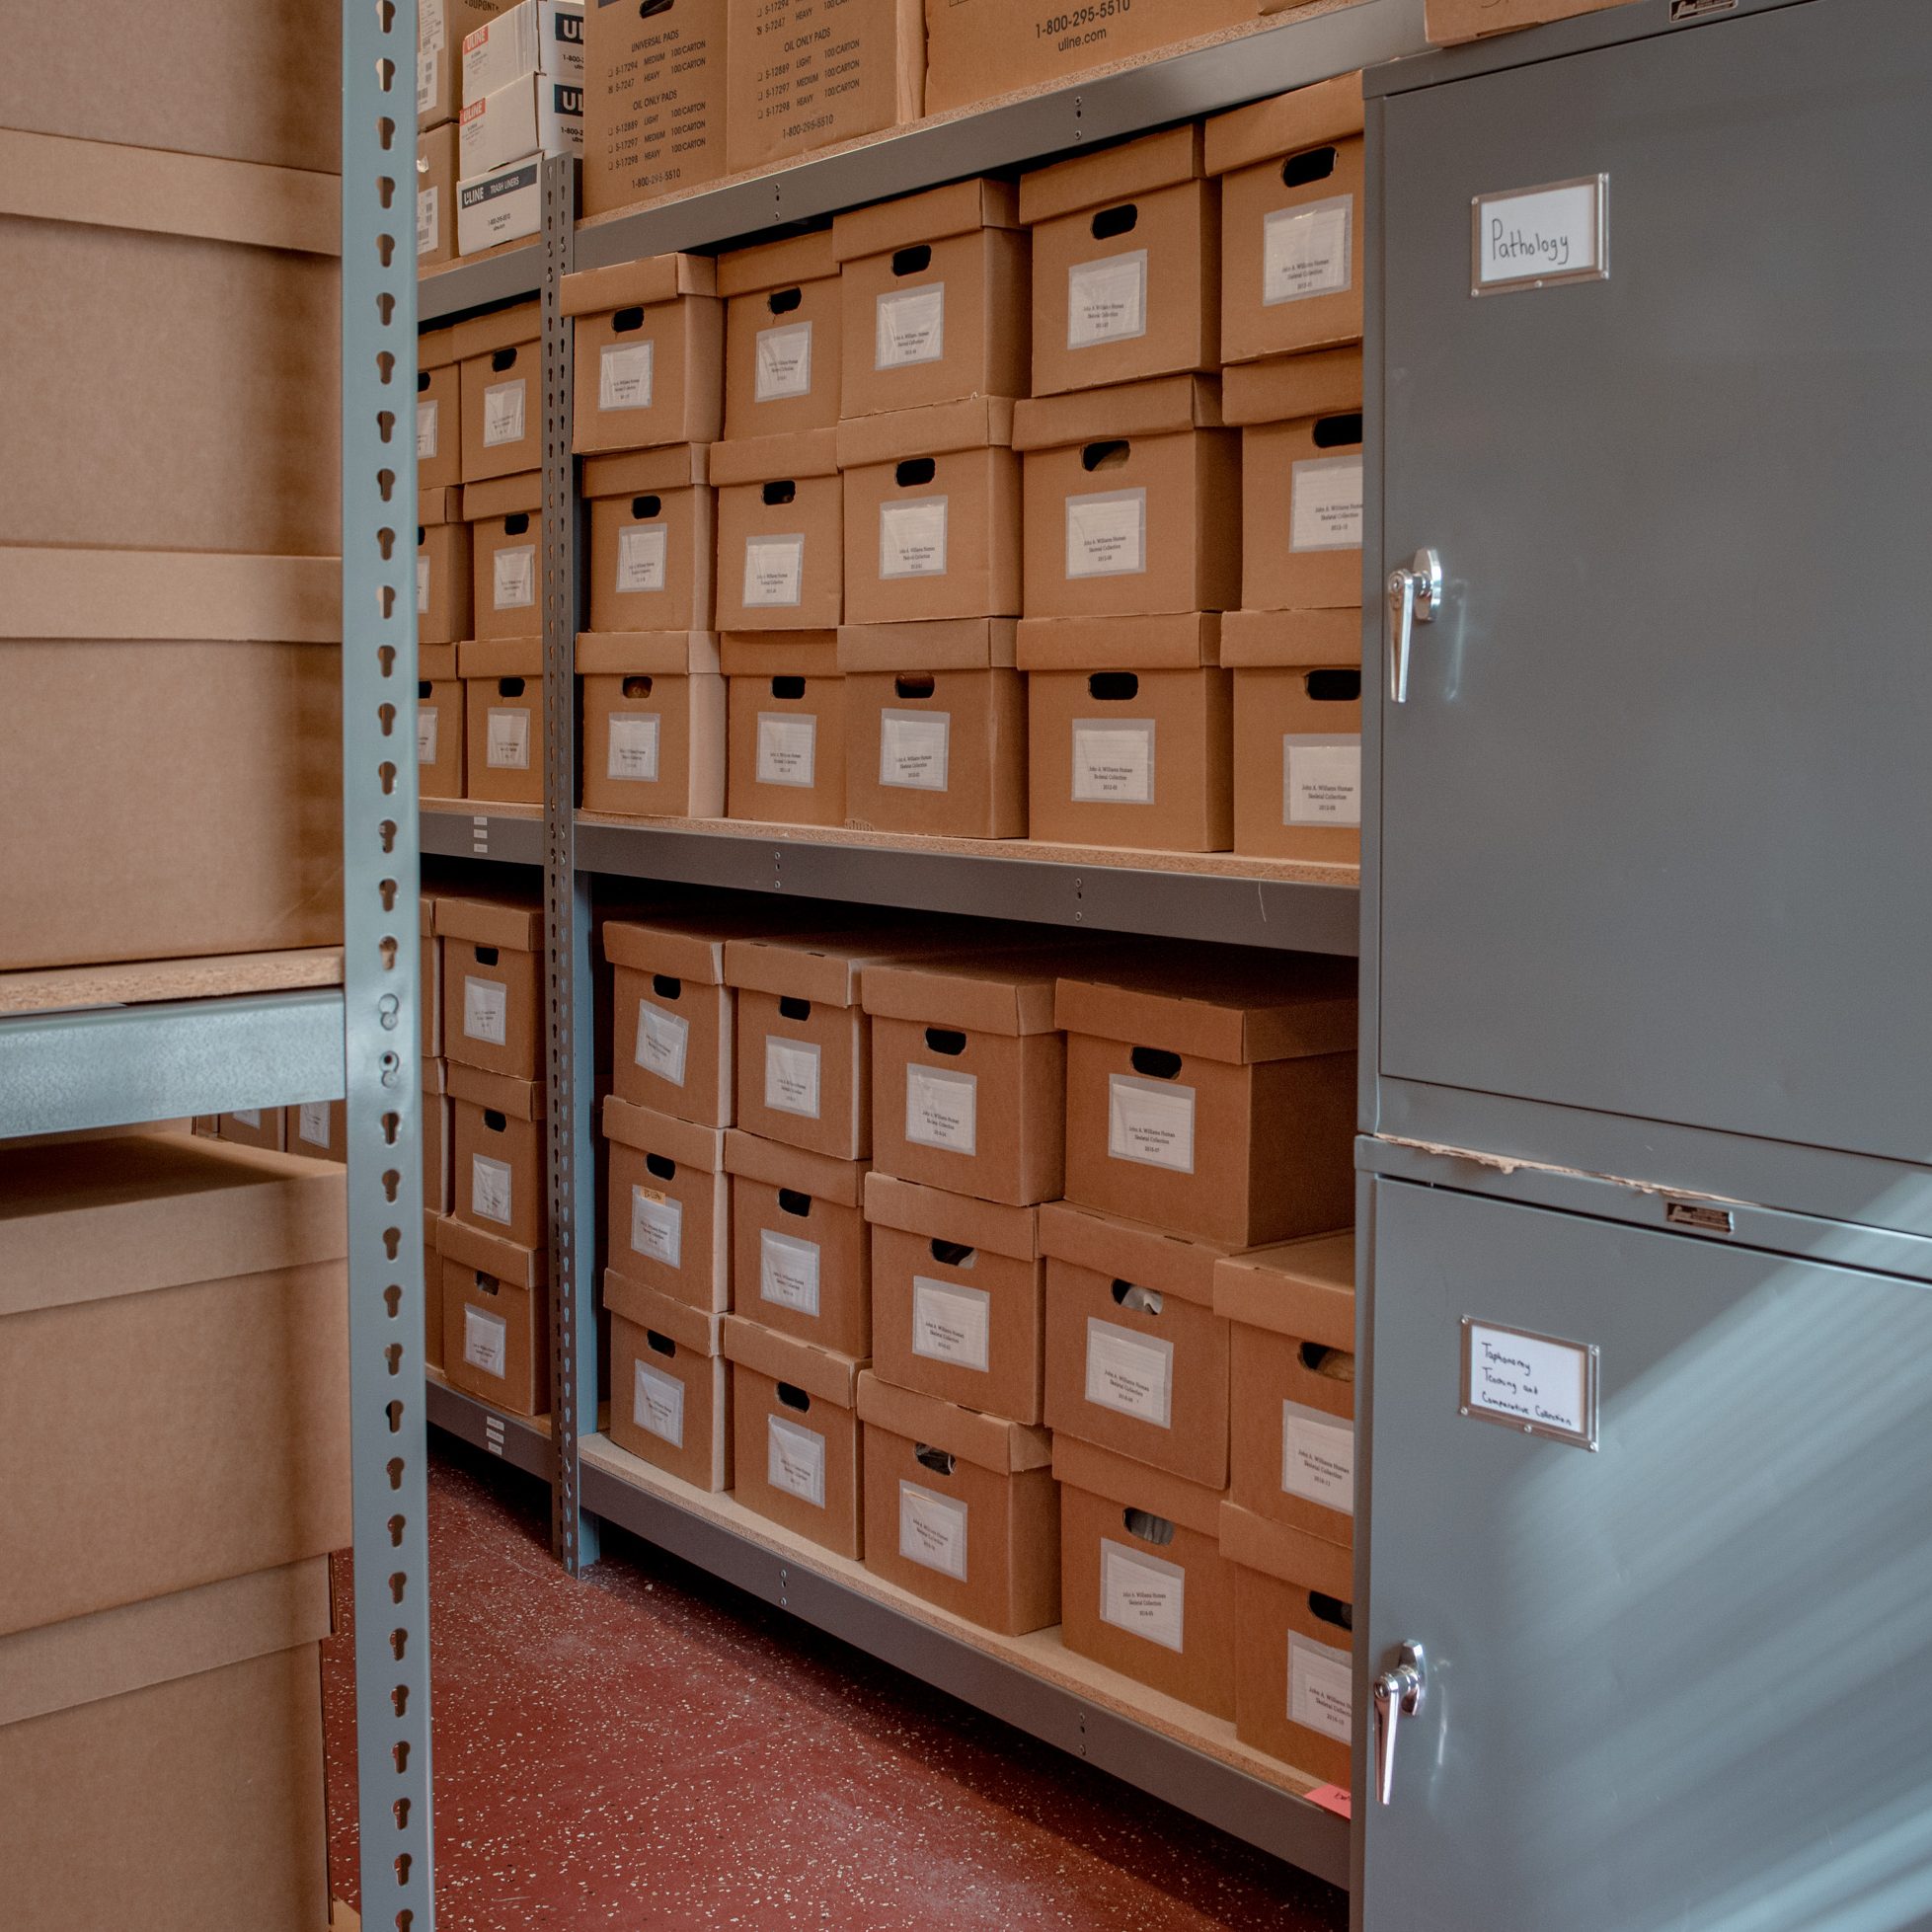 A room of shelved boxes housing the collections of donor remains is seen at the Forensic Anthropology department of Western Carolina University.